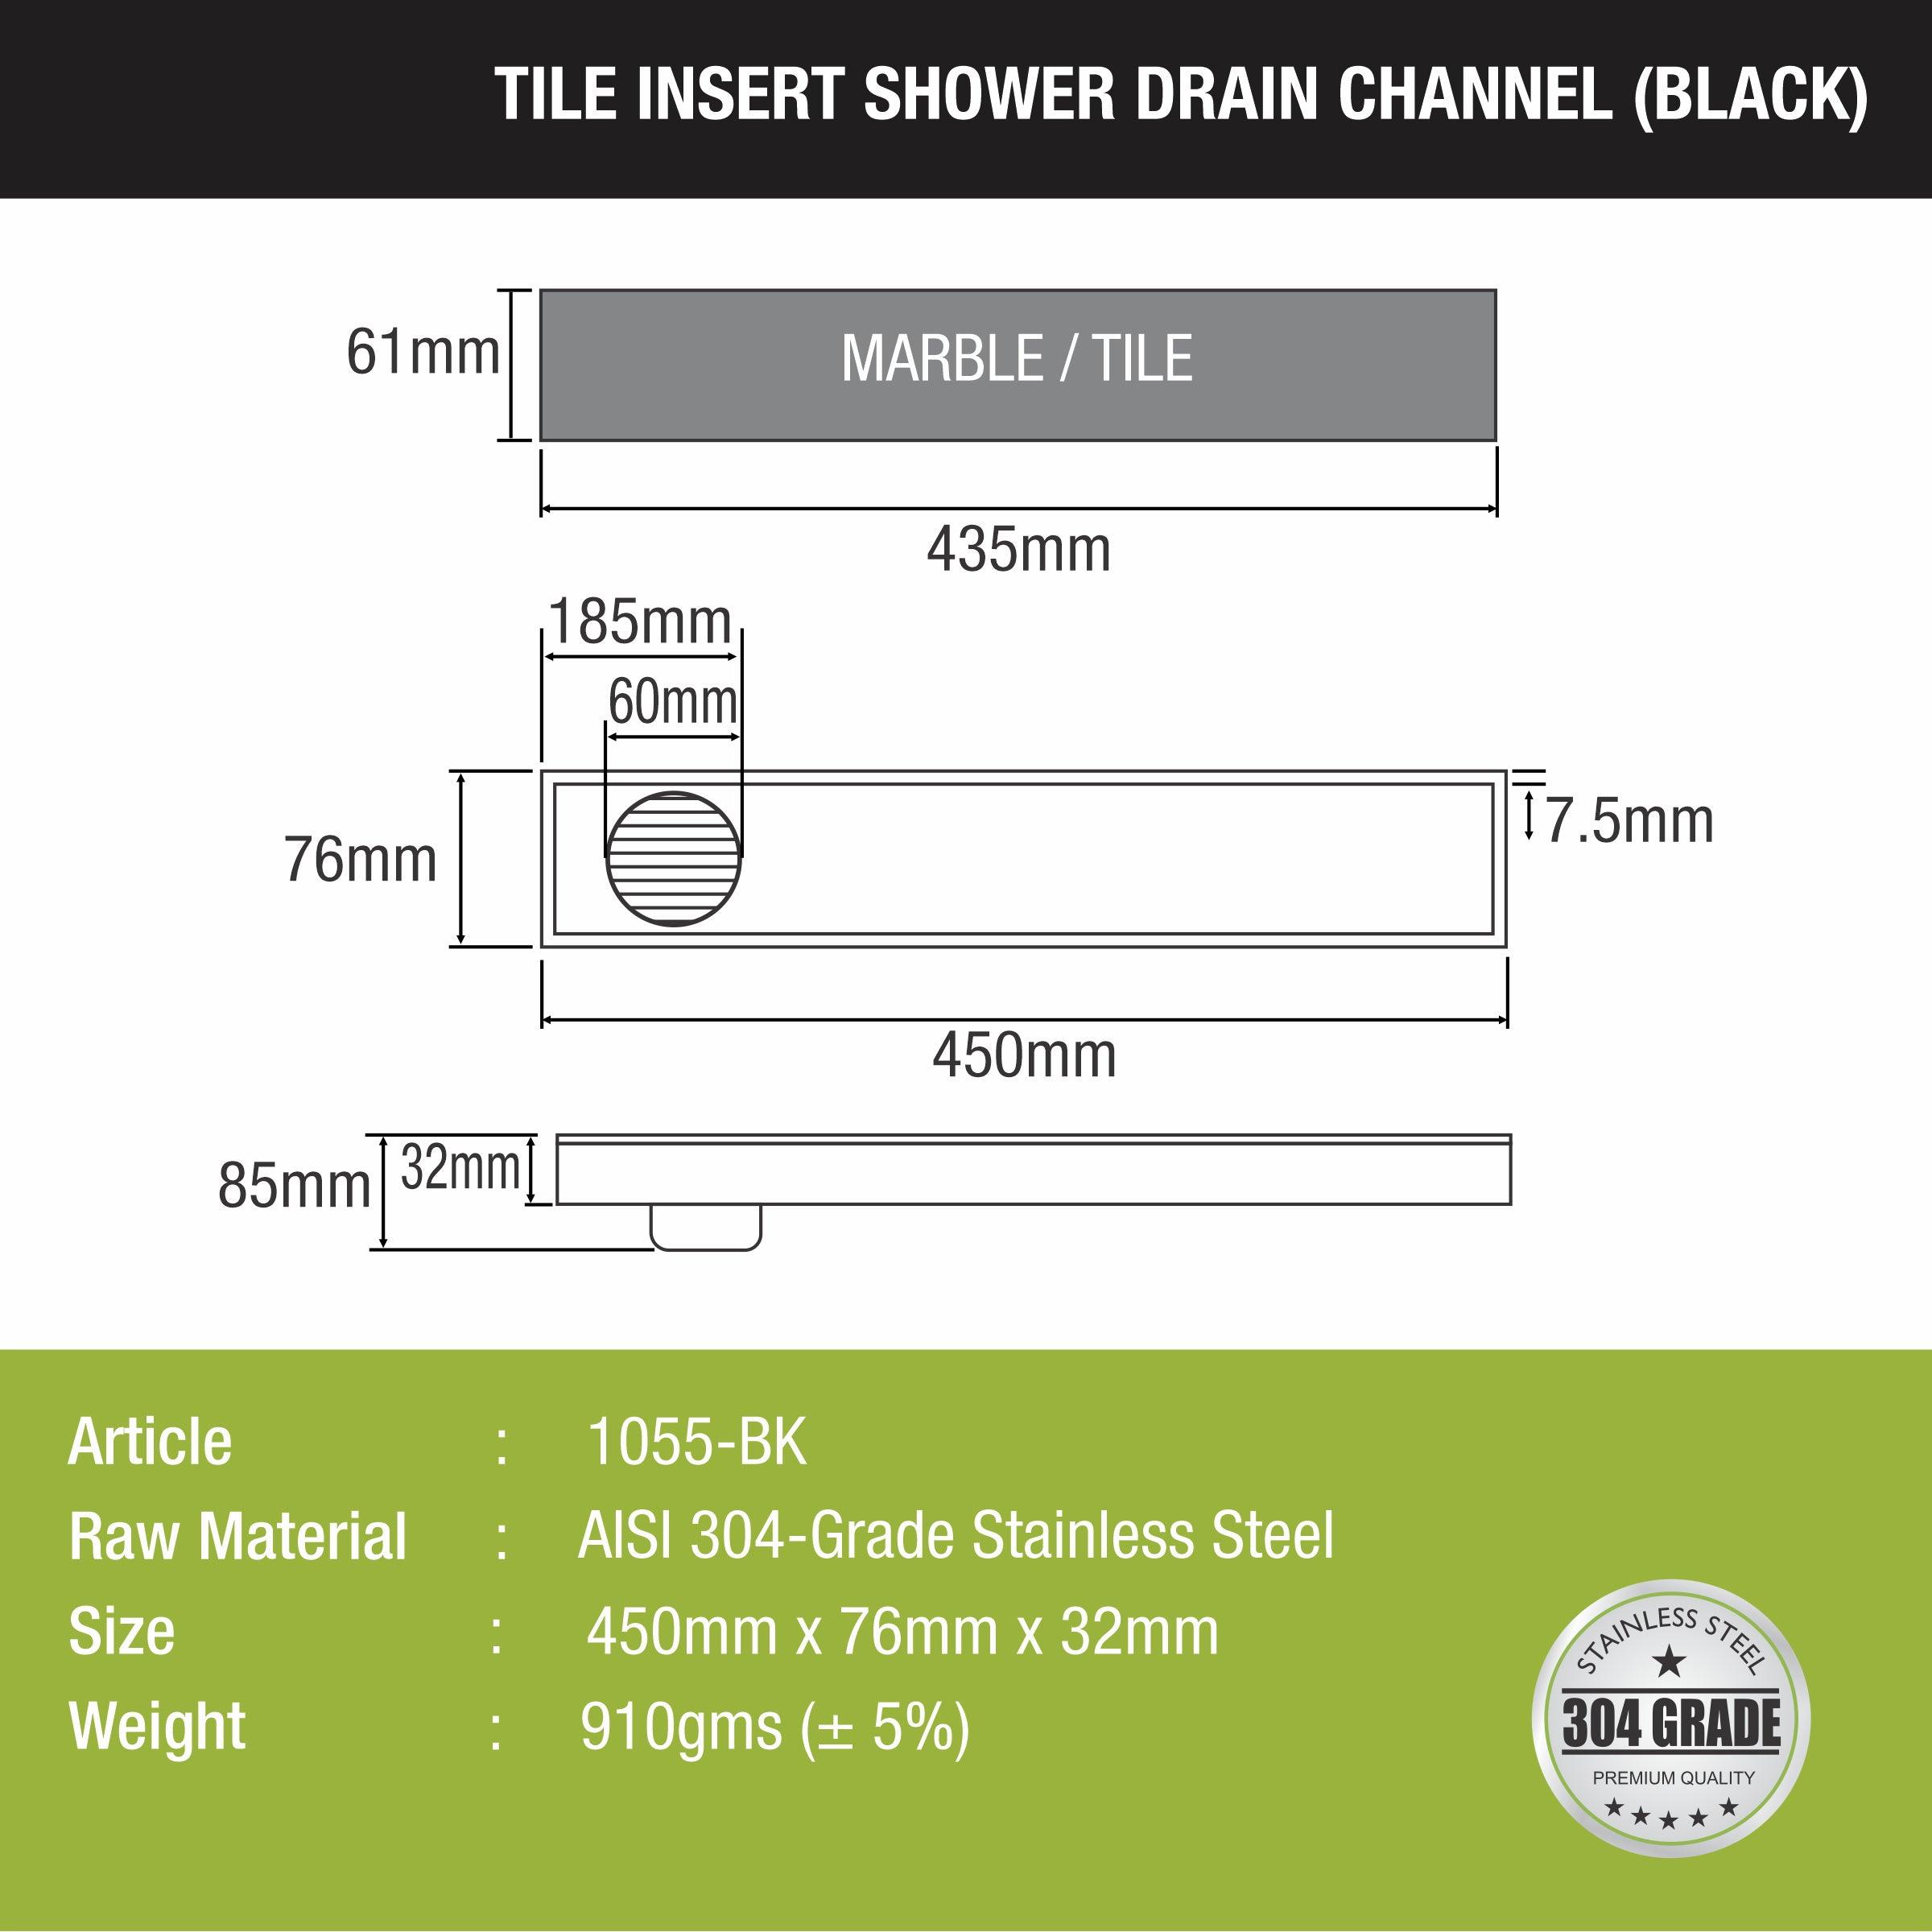 Tile Insert Shower Drain Channel - Black (18 x 3 Inches) size and measurement